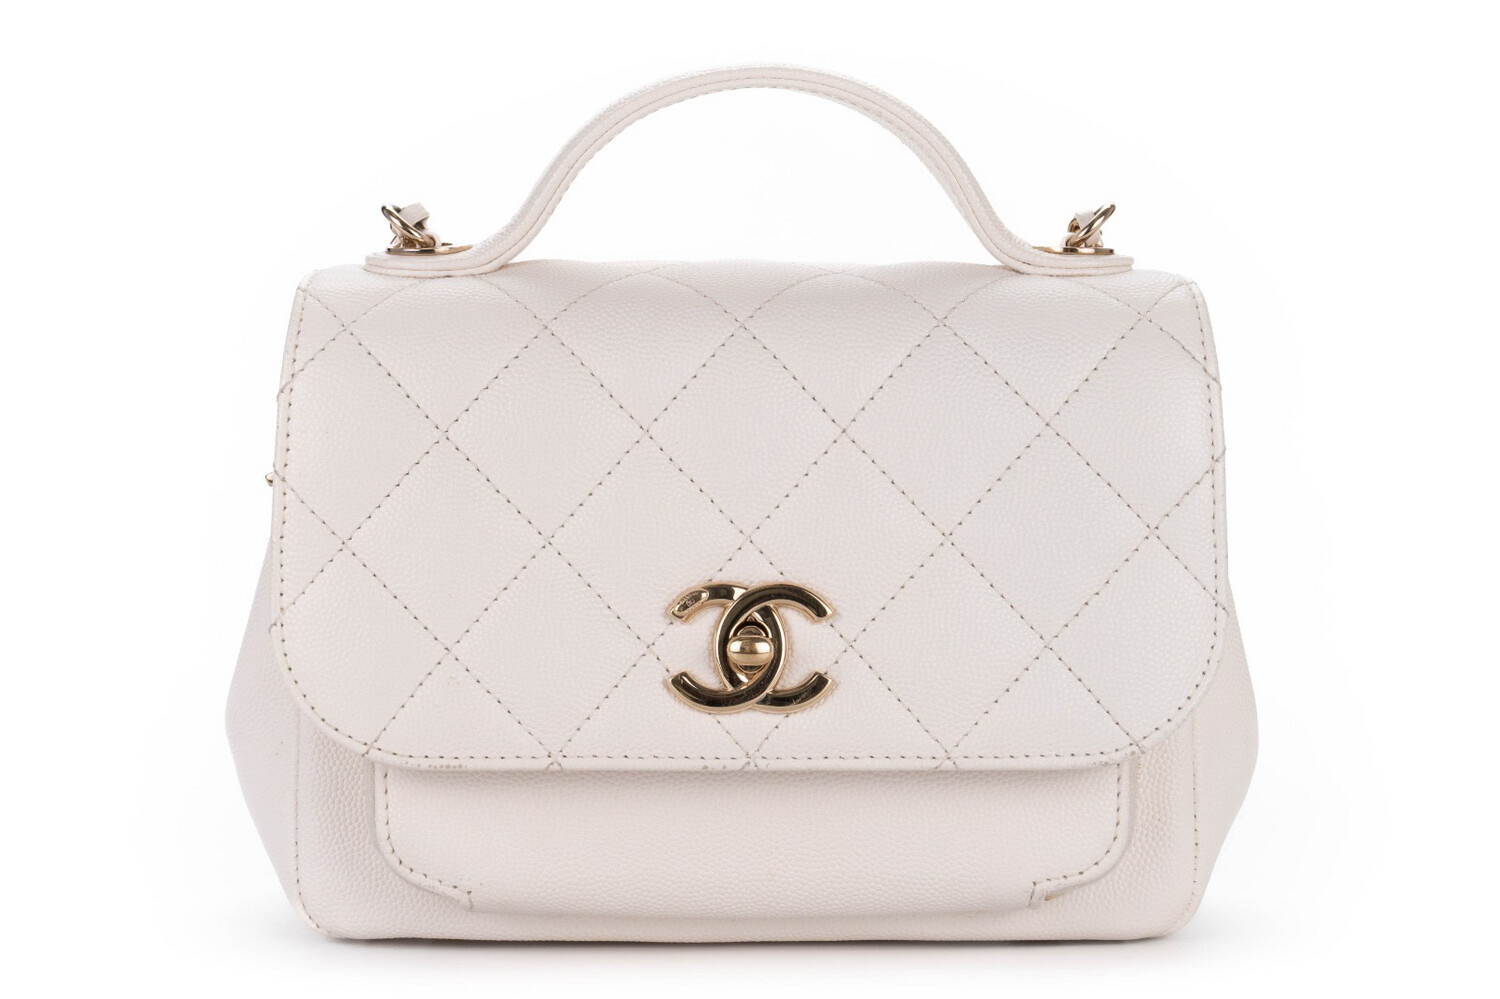 Chanel Business Affinity White Caviar Leather, Gold Hardware, Preowned In  Dustbag (Ships Duty Free From London) - Julia Rose Boston